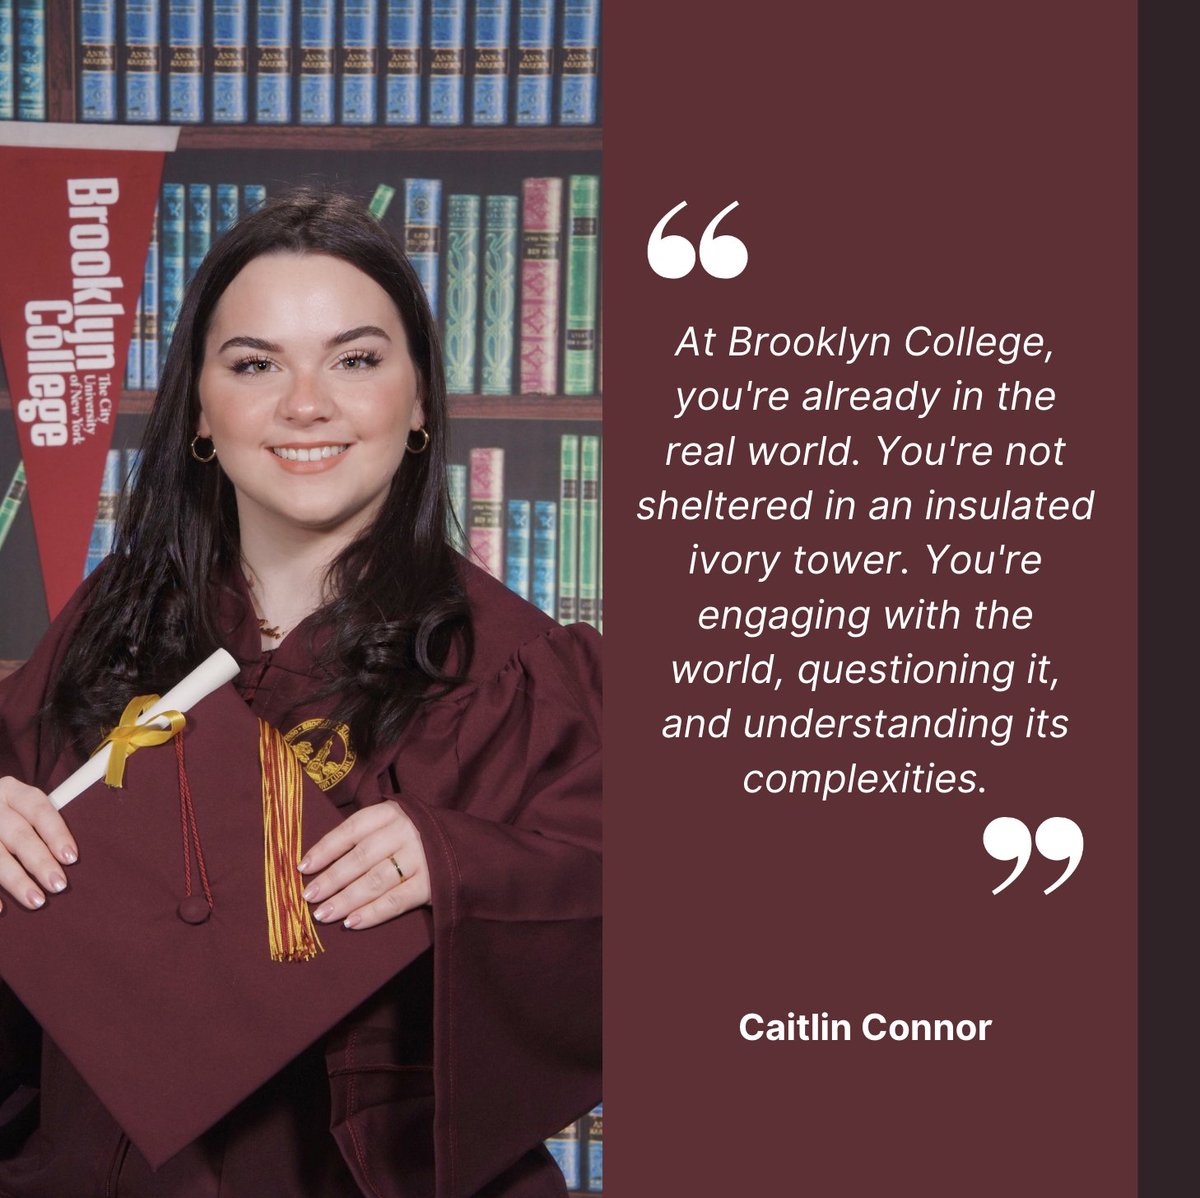 Embrace the real world at Brooklyn College, where we challenge, question, and comprehend its complexities. 🎓✨ Caitlin Connor, BA graduate from Brooklyn College. #RealWorldEducation #QuestionTheWorld #DepartmentalGraduation #PoliticalScience #BrooklynCollegePride